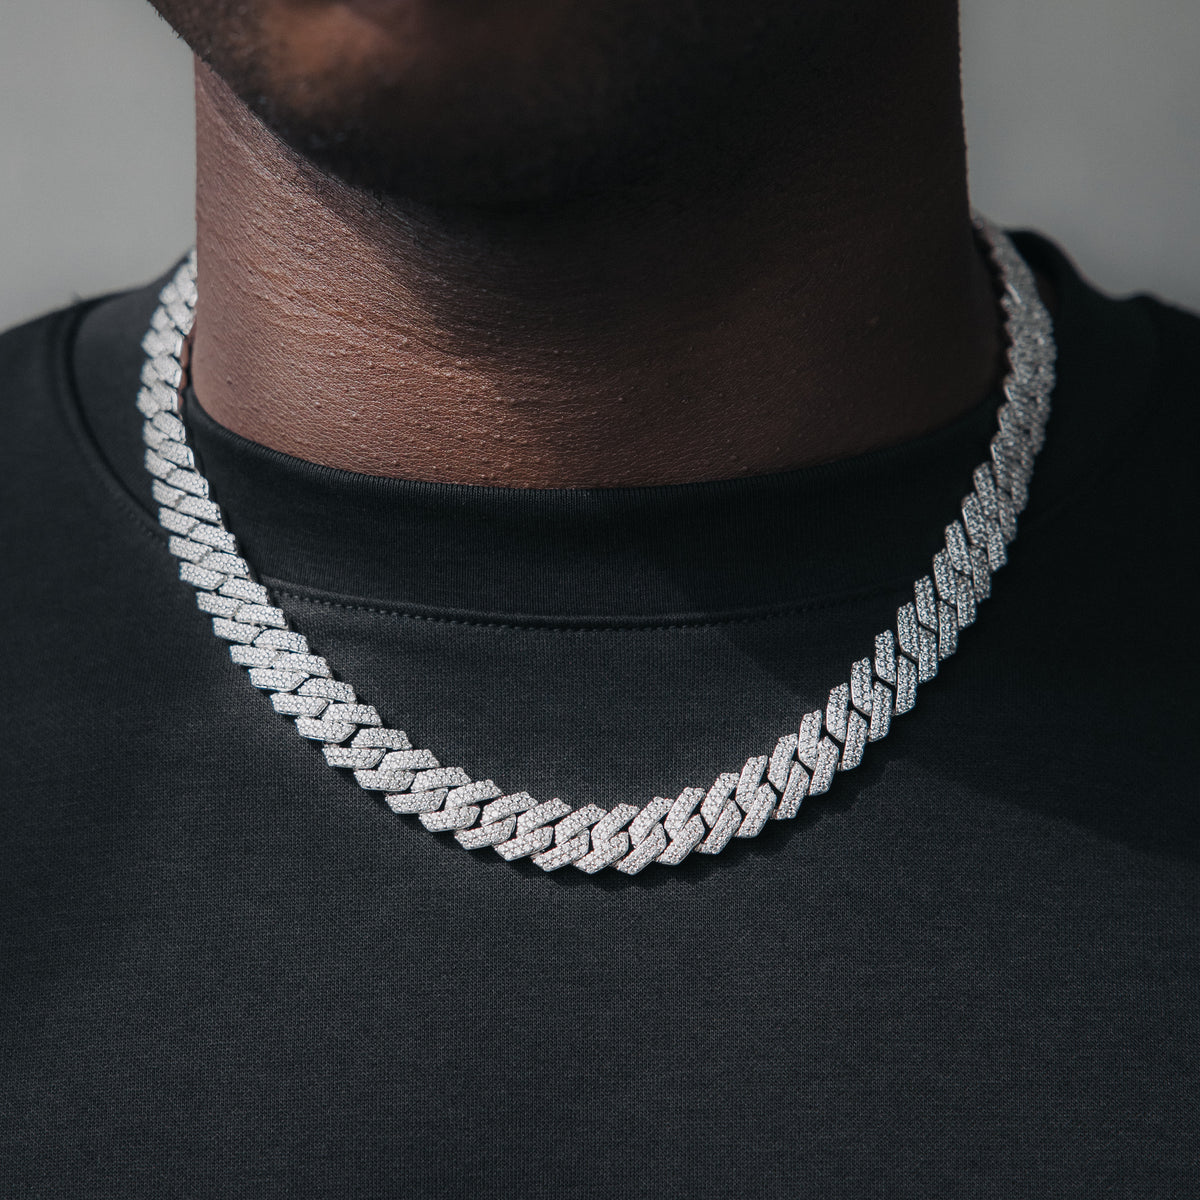 Mens Miami Cuban Link Chain Necklace Silver 12mm Diamond Prong Cuban Chain 24inch Length Hip Hop Jewely with Gift Box(Silver,24), Men's